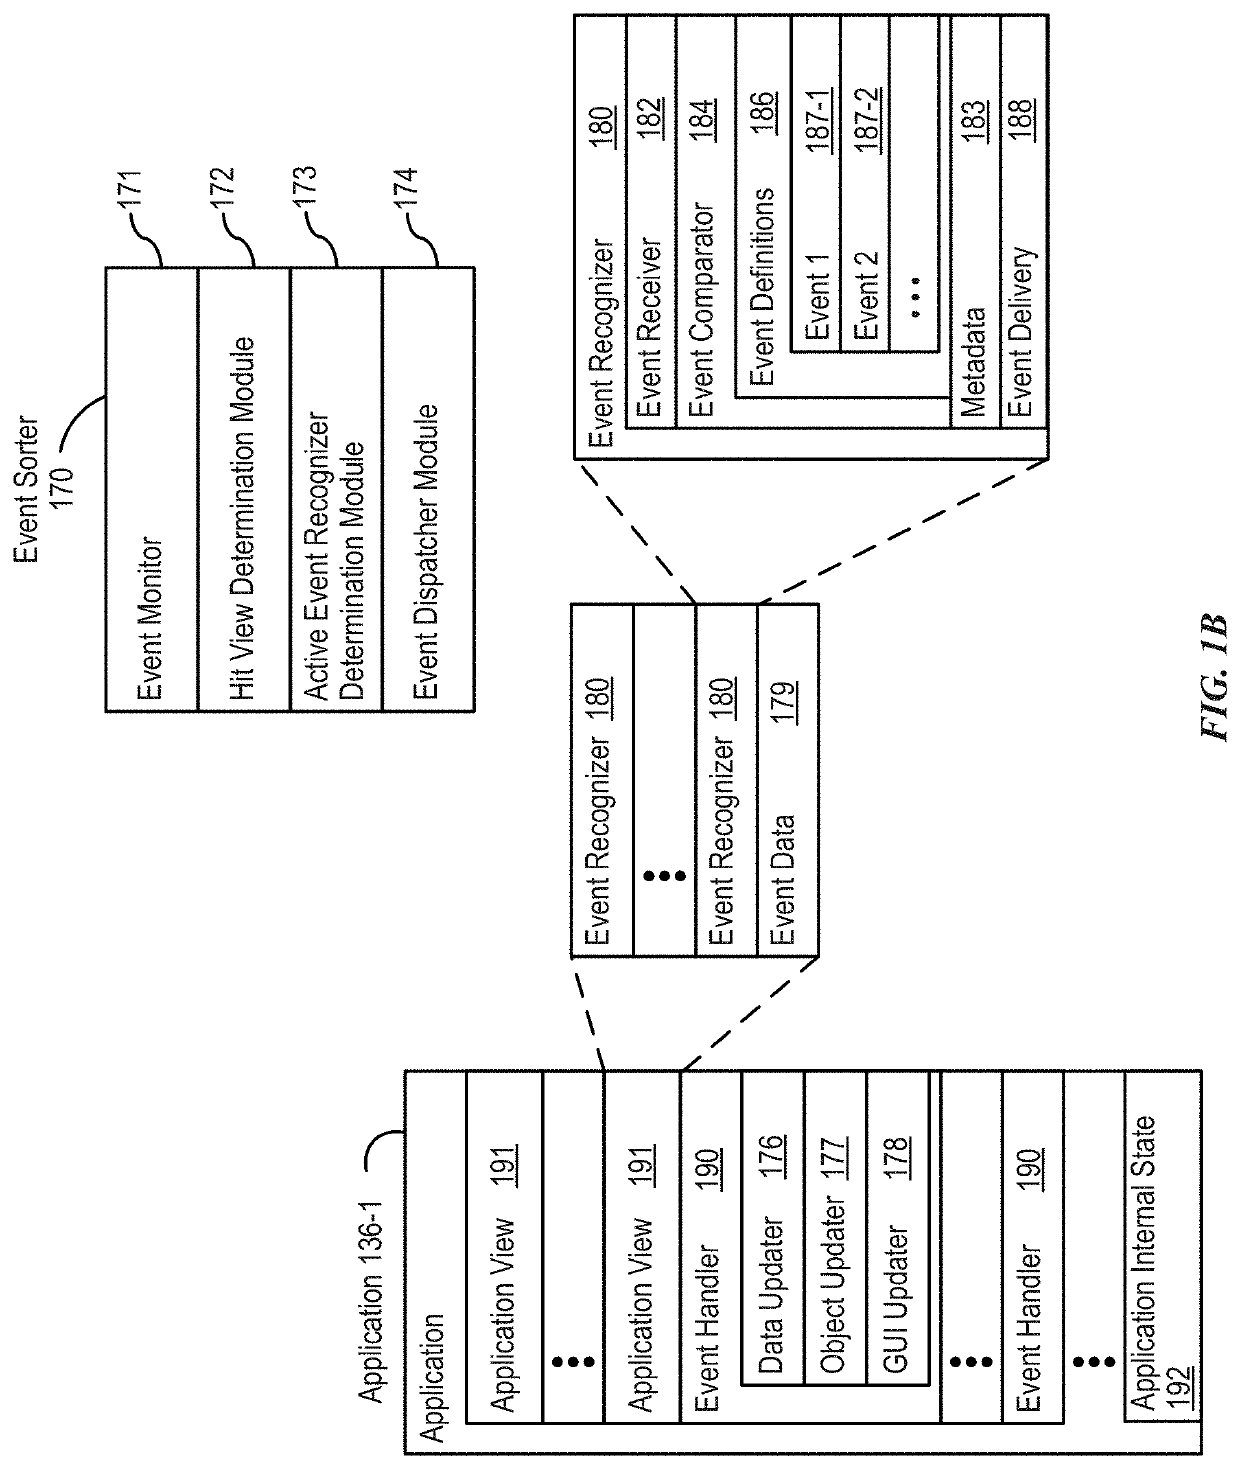 User interfaces for managing controllable external devices